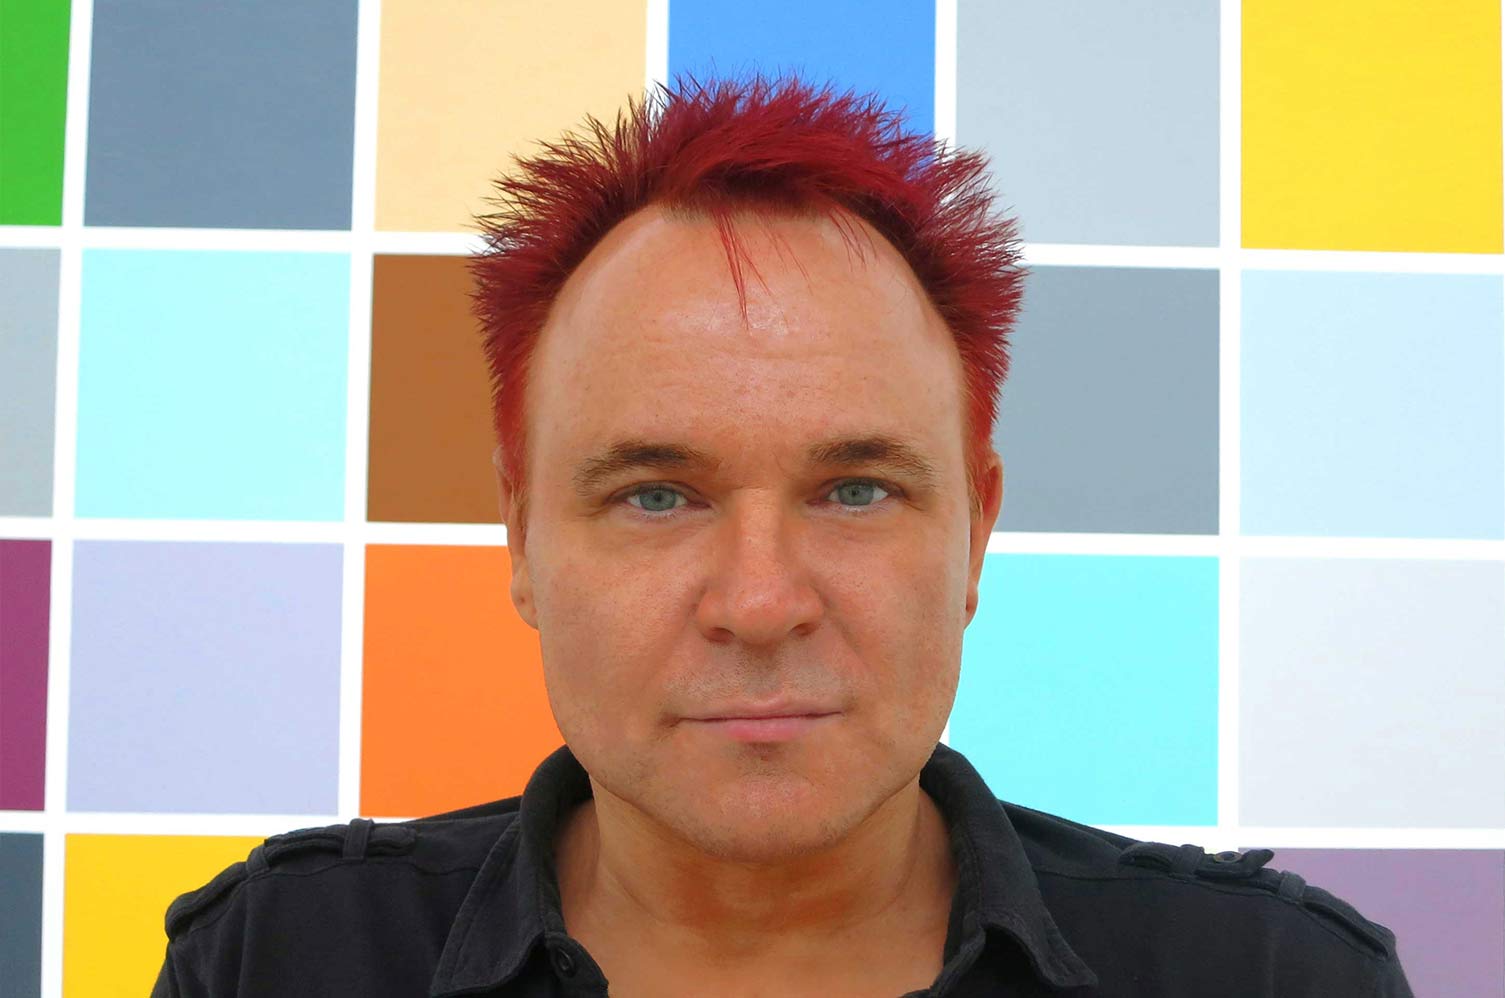 Mik looking directly into the camera, with red spikey hair and a coloured grid pattern behind him